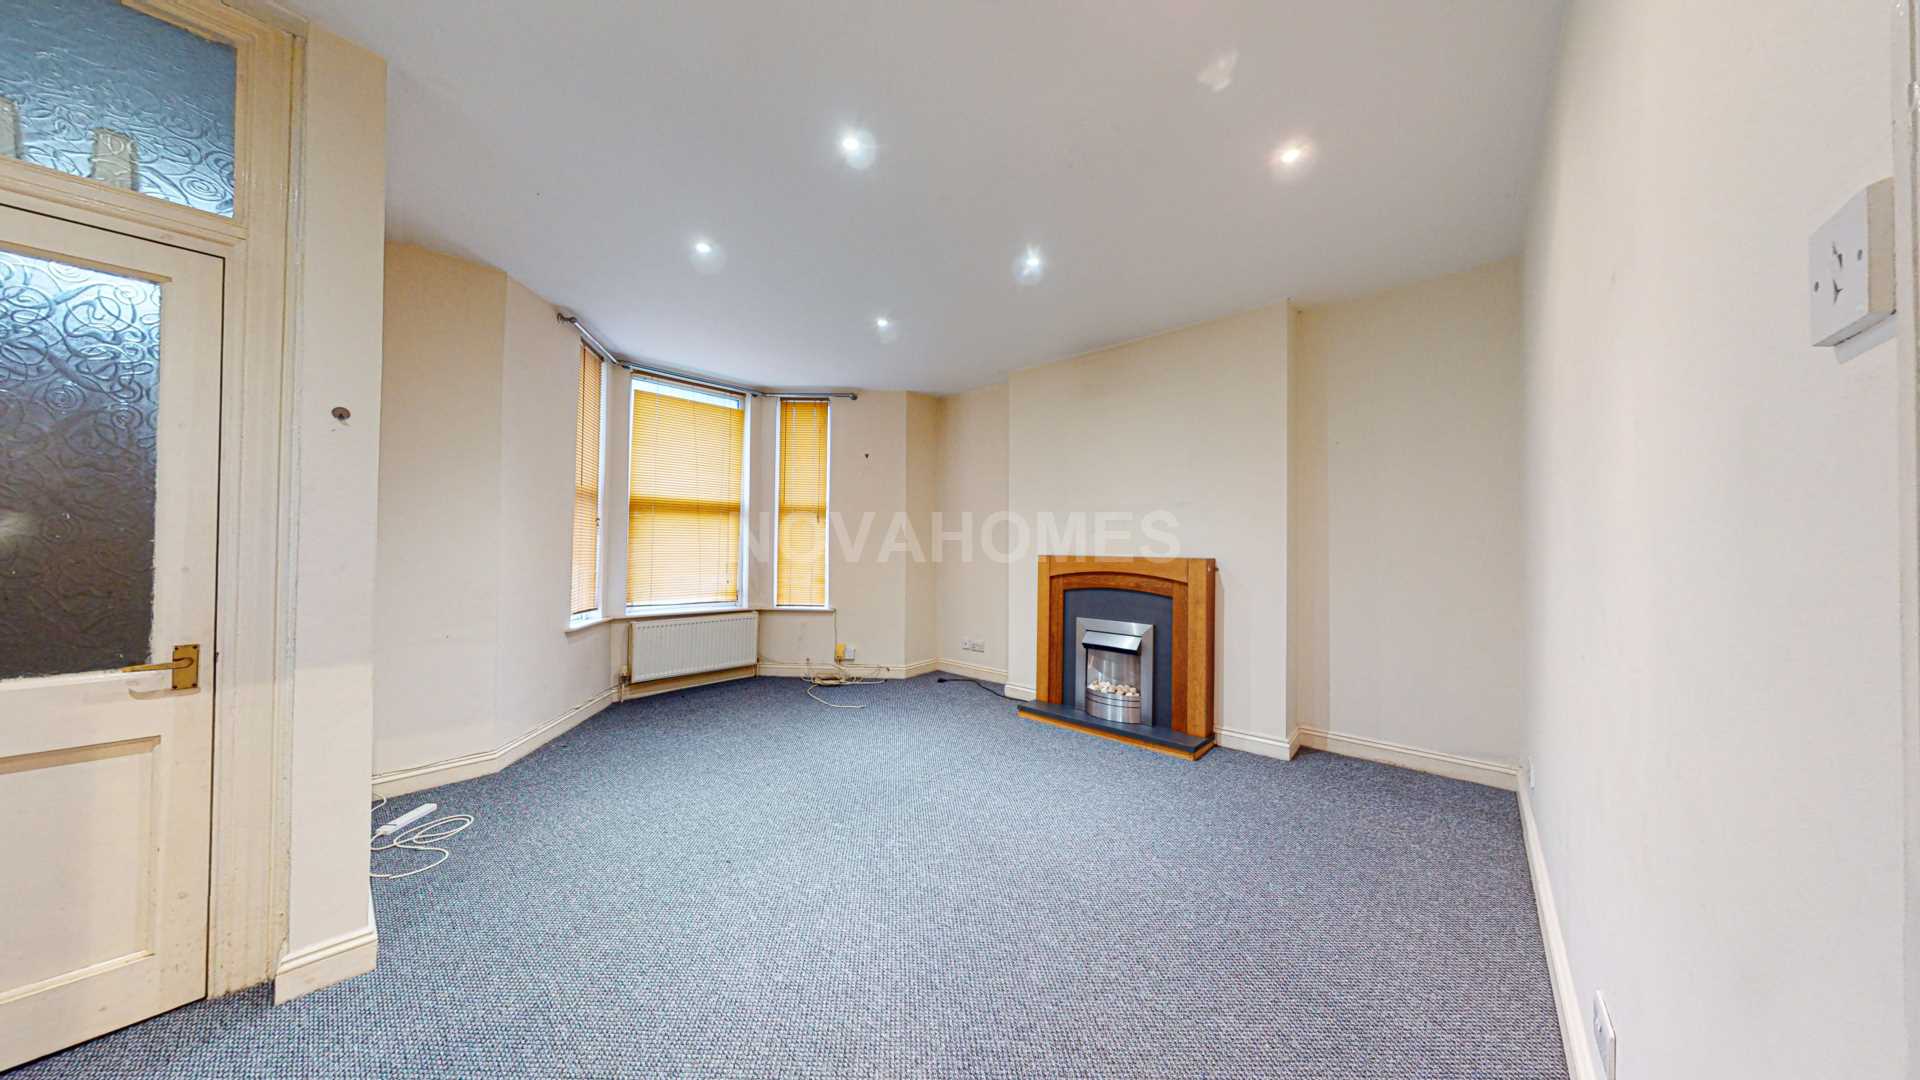 Percy Terrace, Mutley, PL4 7HG, Image 2